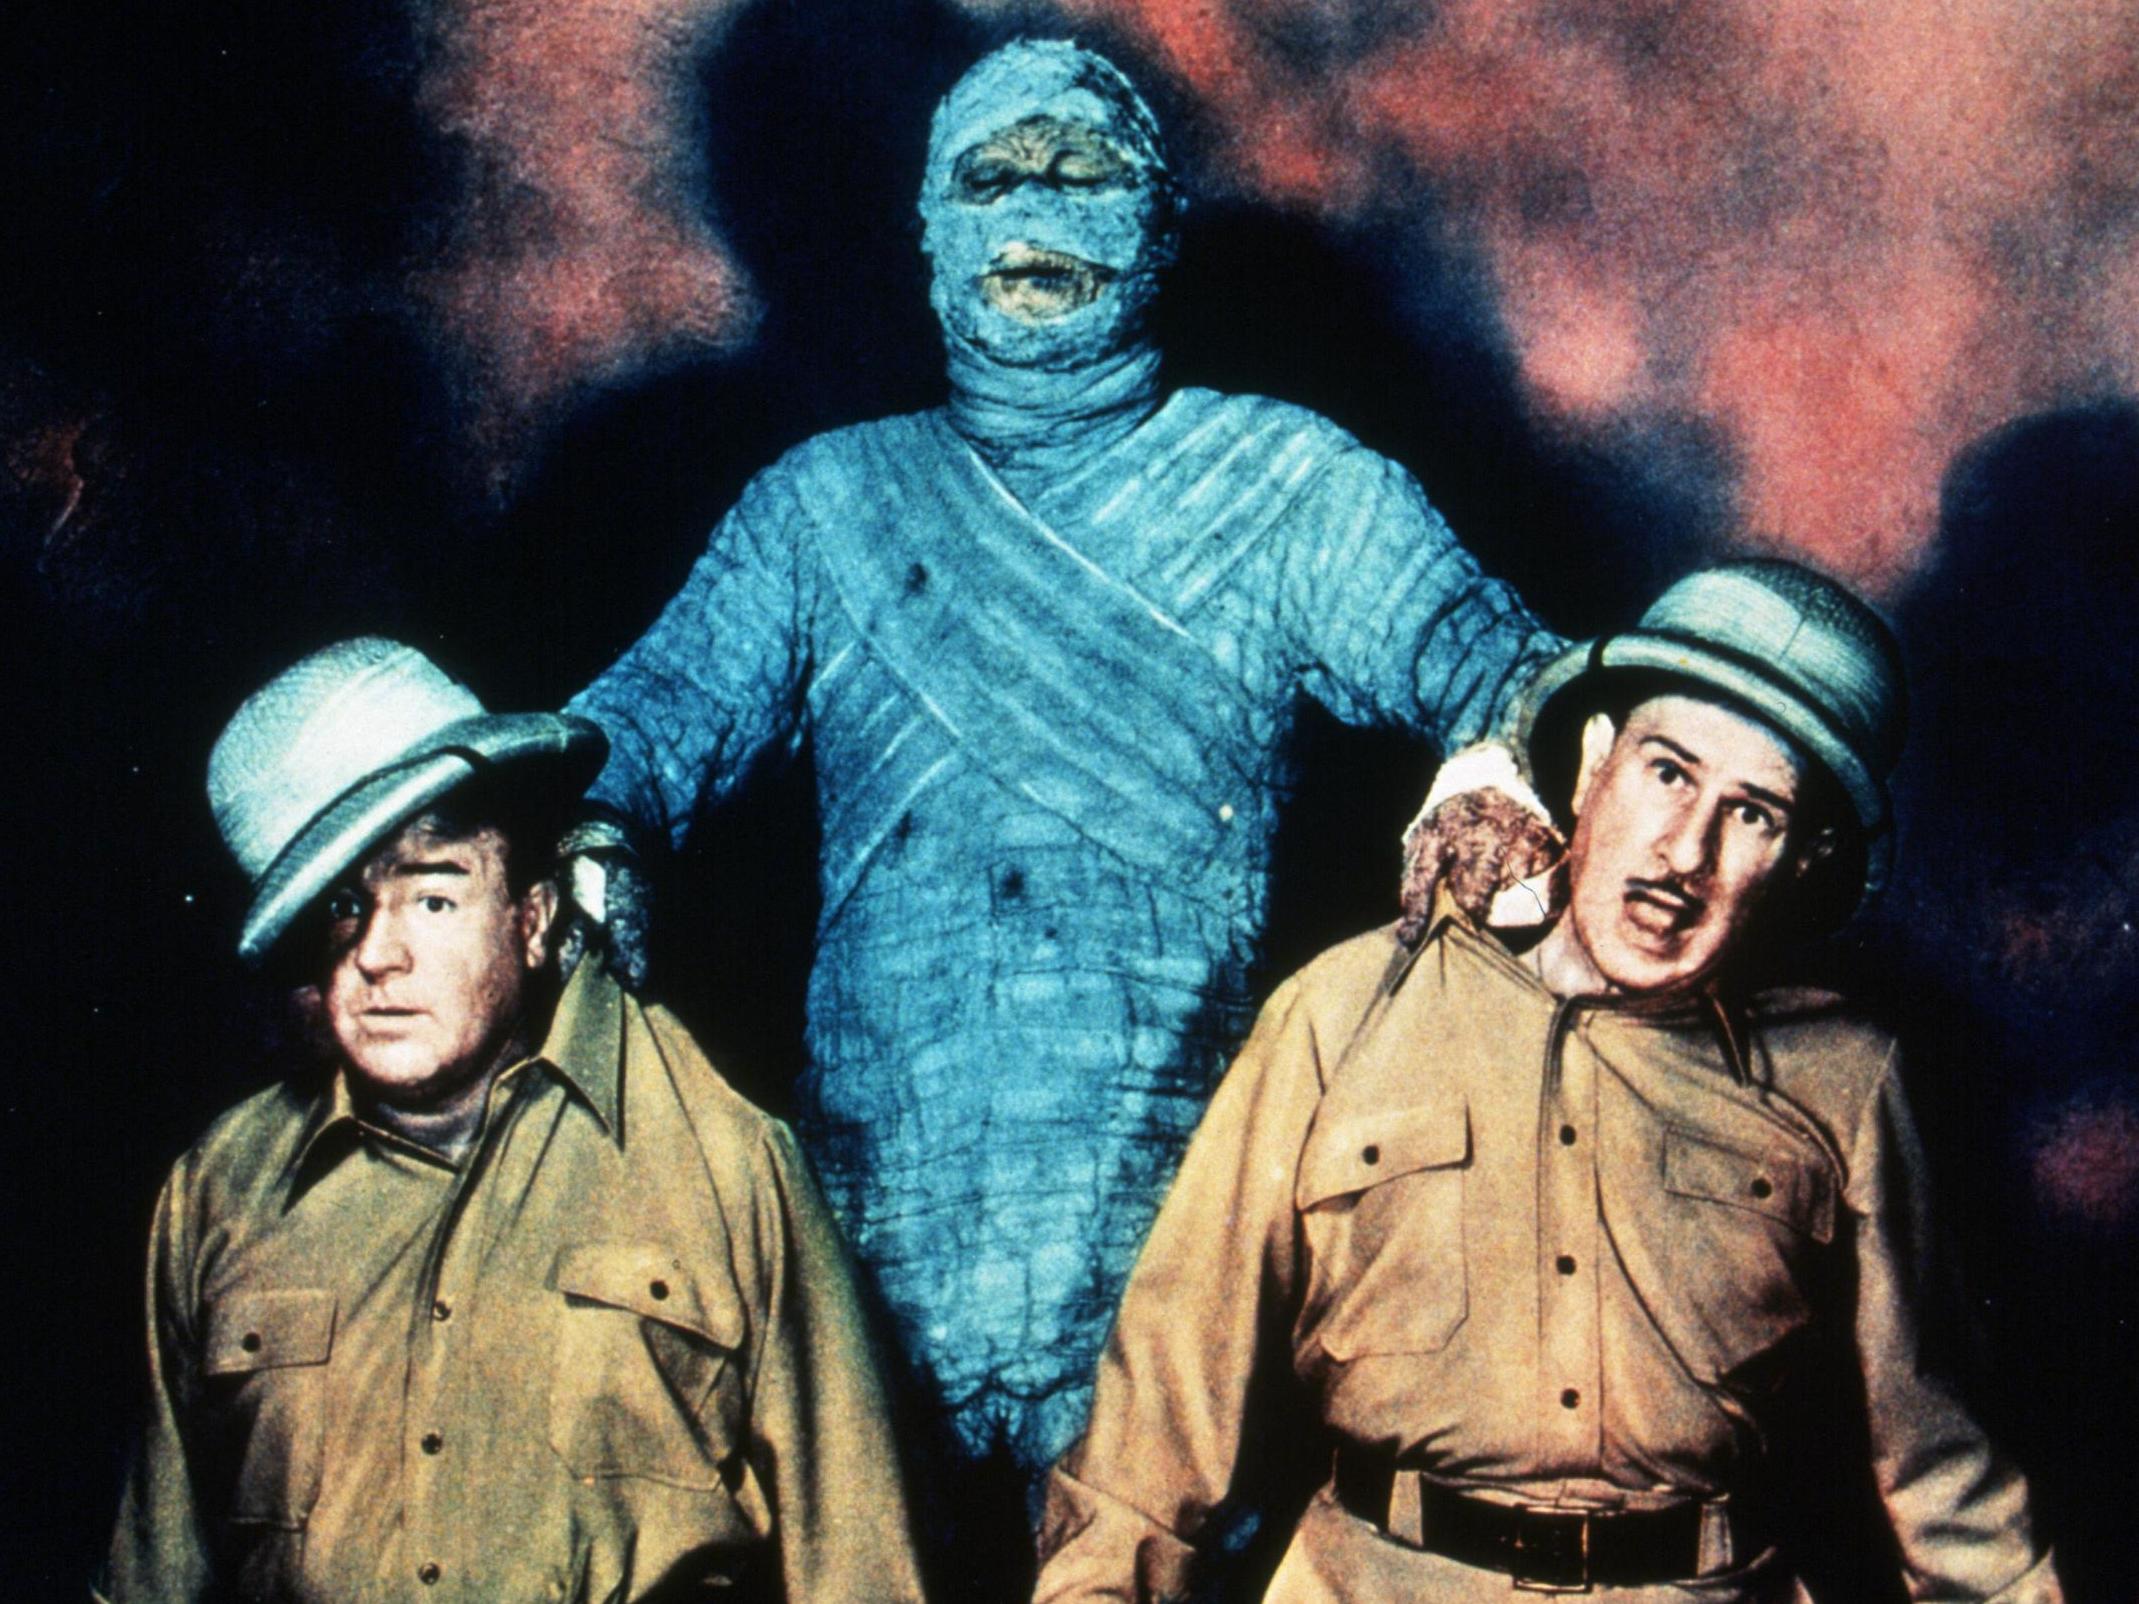 Flogging the comedy-horror horse: 1955’s ‘Abbott and Costello Meet the Mummy’